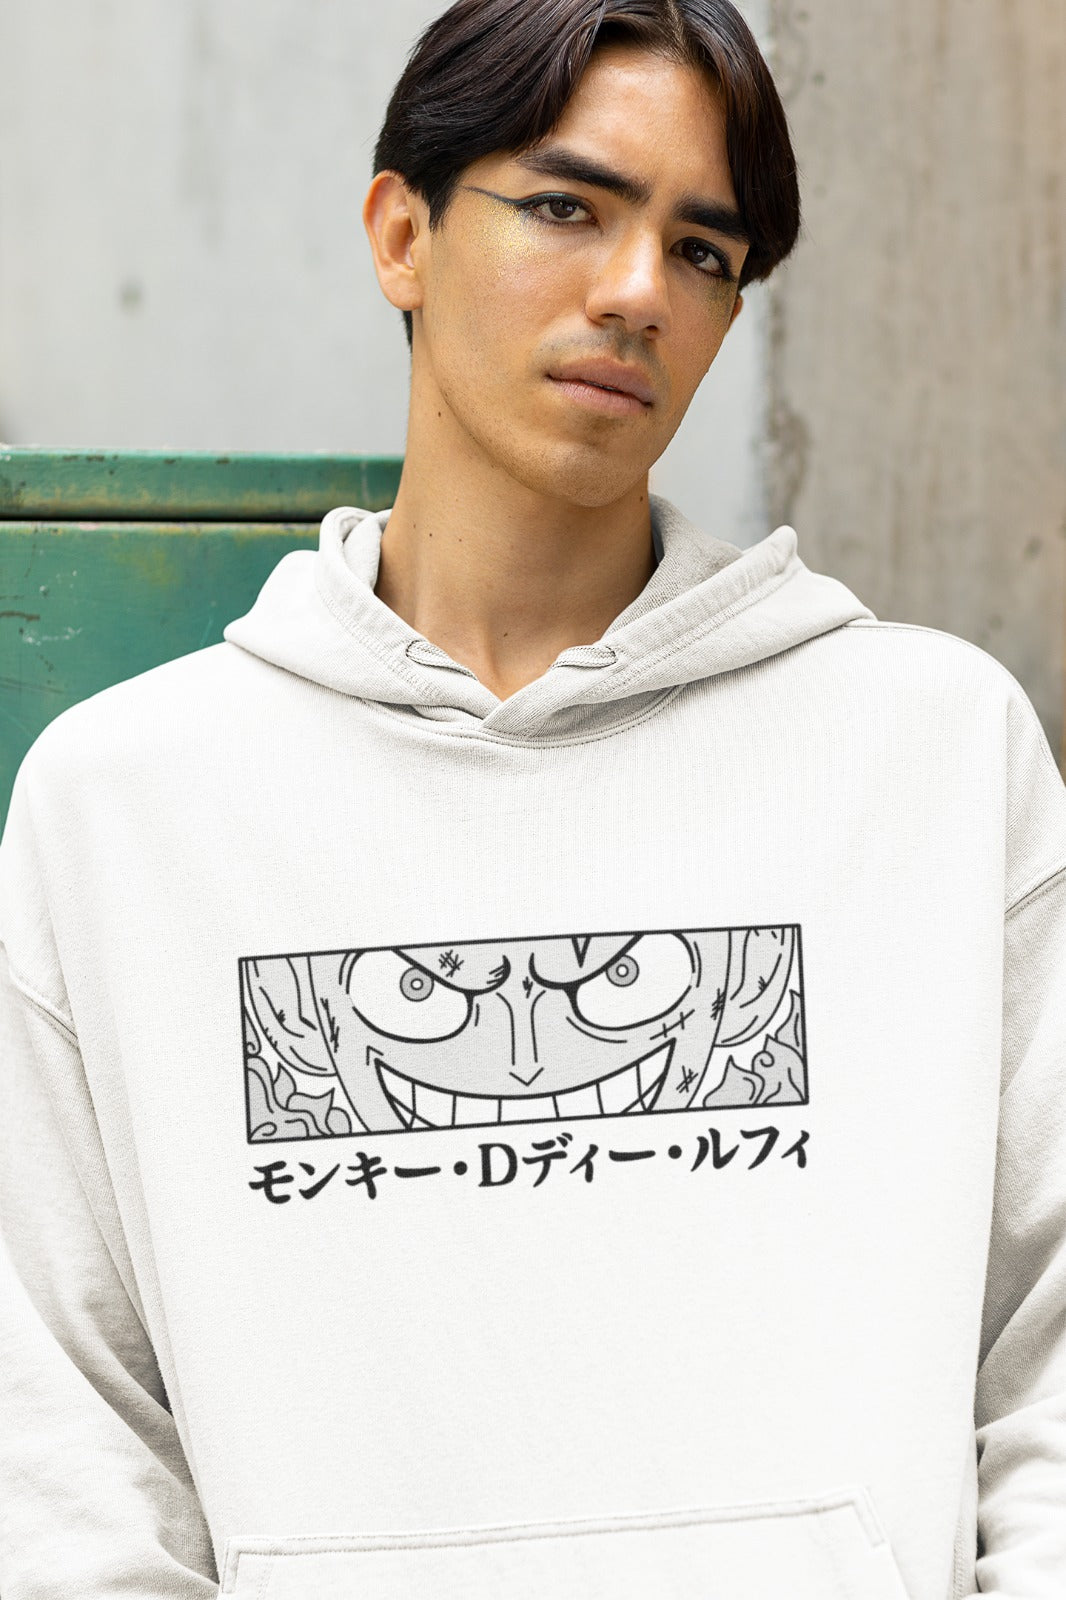 Elevate your anime collection with our White Monkey D. Luffy Oversized Hoodie. On the front, you'll find a captivating graphic design featuring Luffy's determined half-face with a cheerful smile, complemented by his name in bold Japanese characters. This hoodie is perfect for fans of One Piece, combining comfort and style while showcasing your admiration for the iconic Monkey D. Luffy. Embrace the world of pirates with this unique and cozy hoodie.